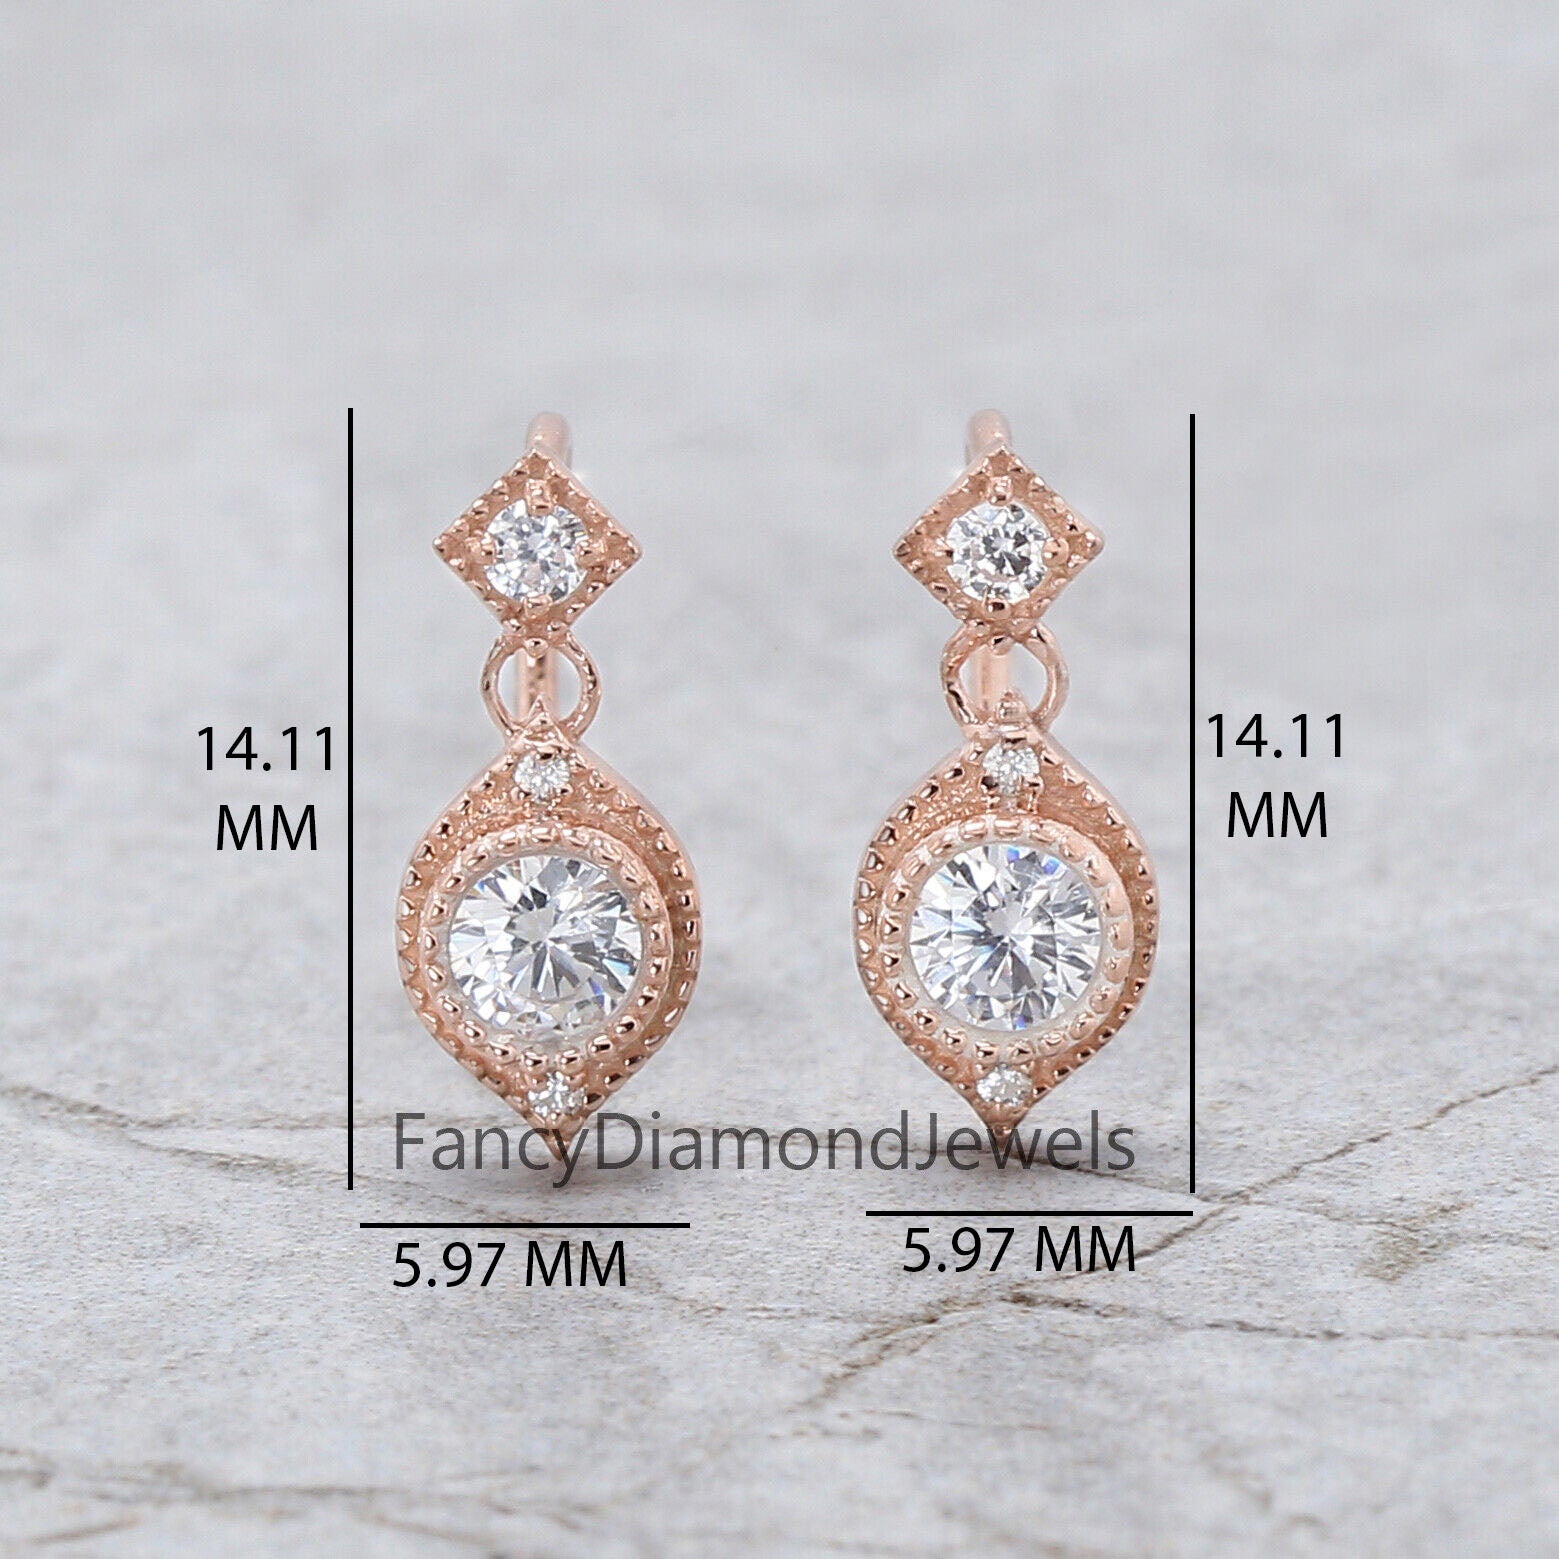 Round White Color Diamond Earring Engagement Wedding Gift Earring 14K Solid Rose White Yellow Gold Earring 0.42 CT KD994